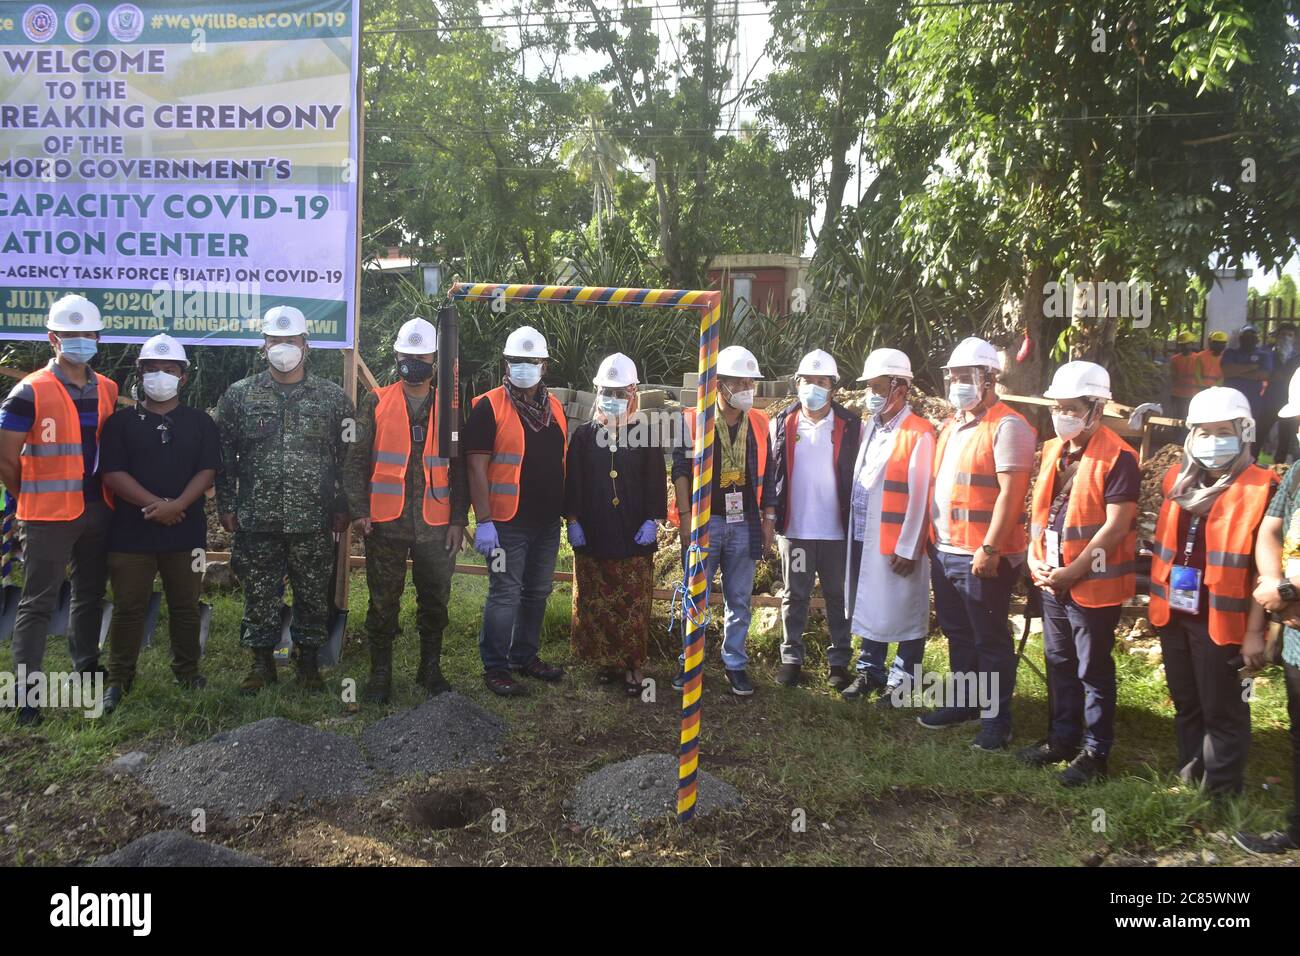 Bongao, Tawi-Tawi, Philippines. 21st July 2020. Ground breaking ceremony of the Bangsamoro governments.The 100 bed capacity Covid-19 isolation Center. Bangsamoro Inter Agency Task Force (BIATF) on Covid 19. Datu Halun Sakilan Memorial Hospital, Bongao, Tawi-Tawi, Philippines. Joining the Minister in a short program held at Datu Halun Sakilan Memorial Hospital were 2nd Marine Brigade Commander Col Chito G Rojas PN (M)(GSC) and 2MBDE DBC Col Nestor E Narag PN (M)(GSC), Governor Yshamael I. Sali, Vice-Governor Michail K. Ahaja and Dr. Sangkula G. Laja. Credit: Pacific Press Agency/Alamy Live News Stock Photo